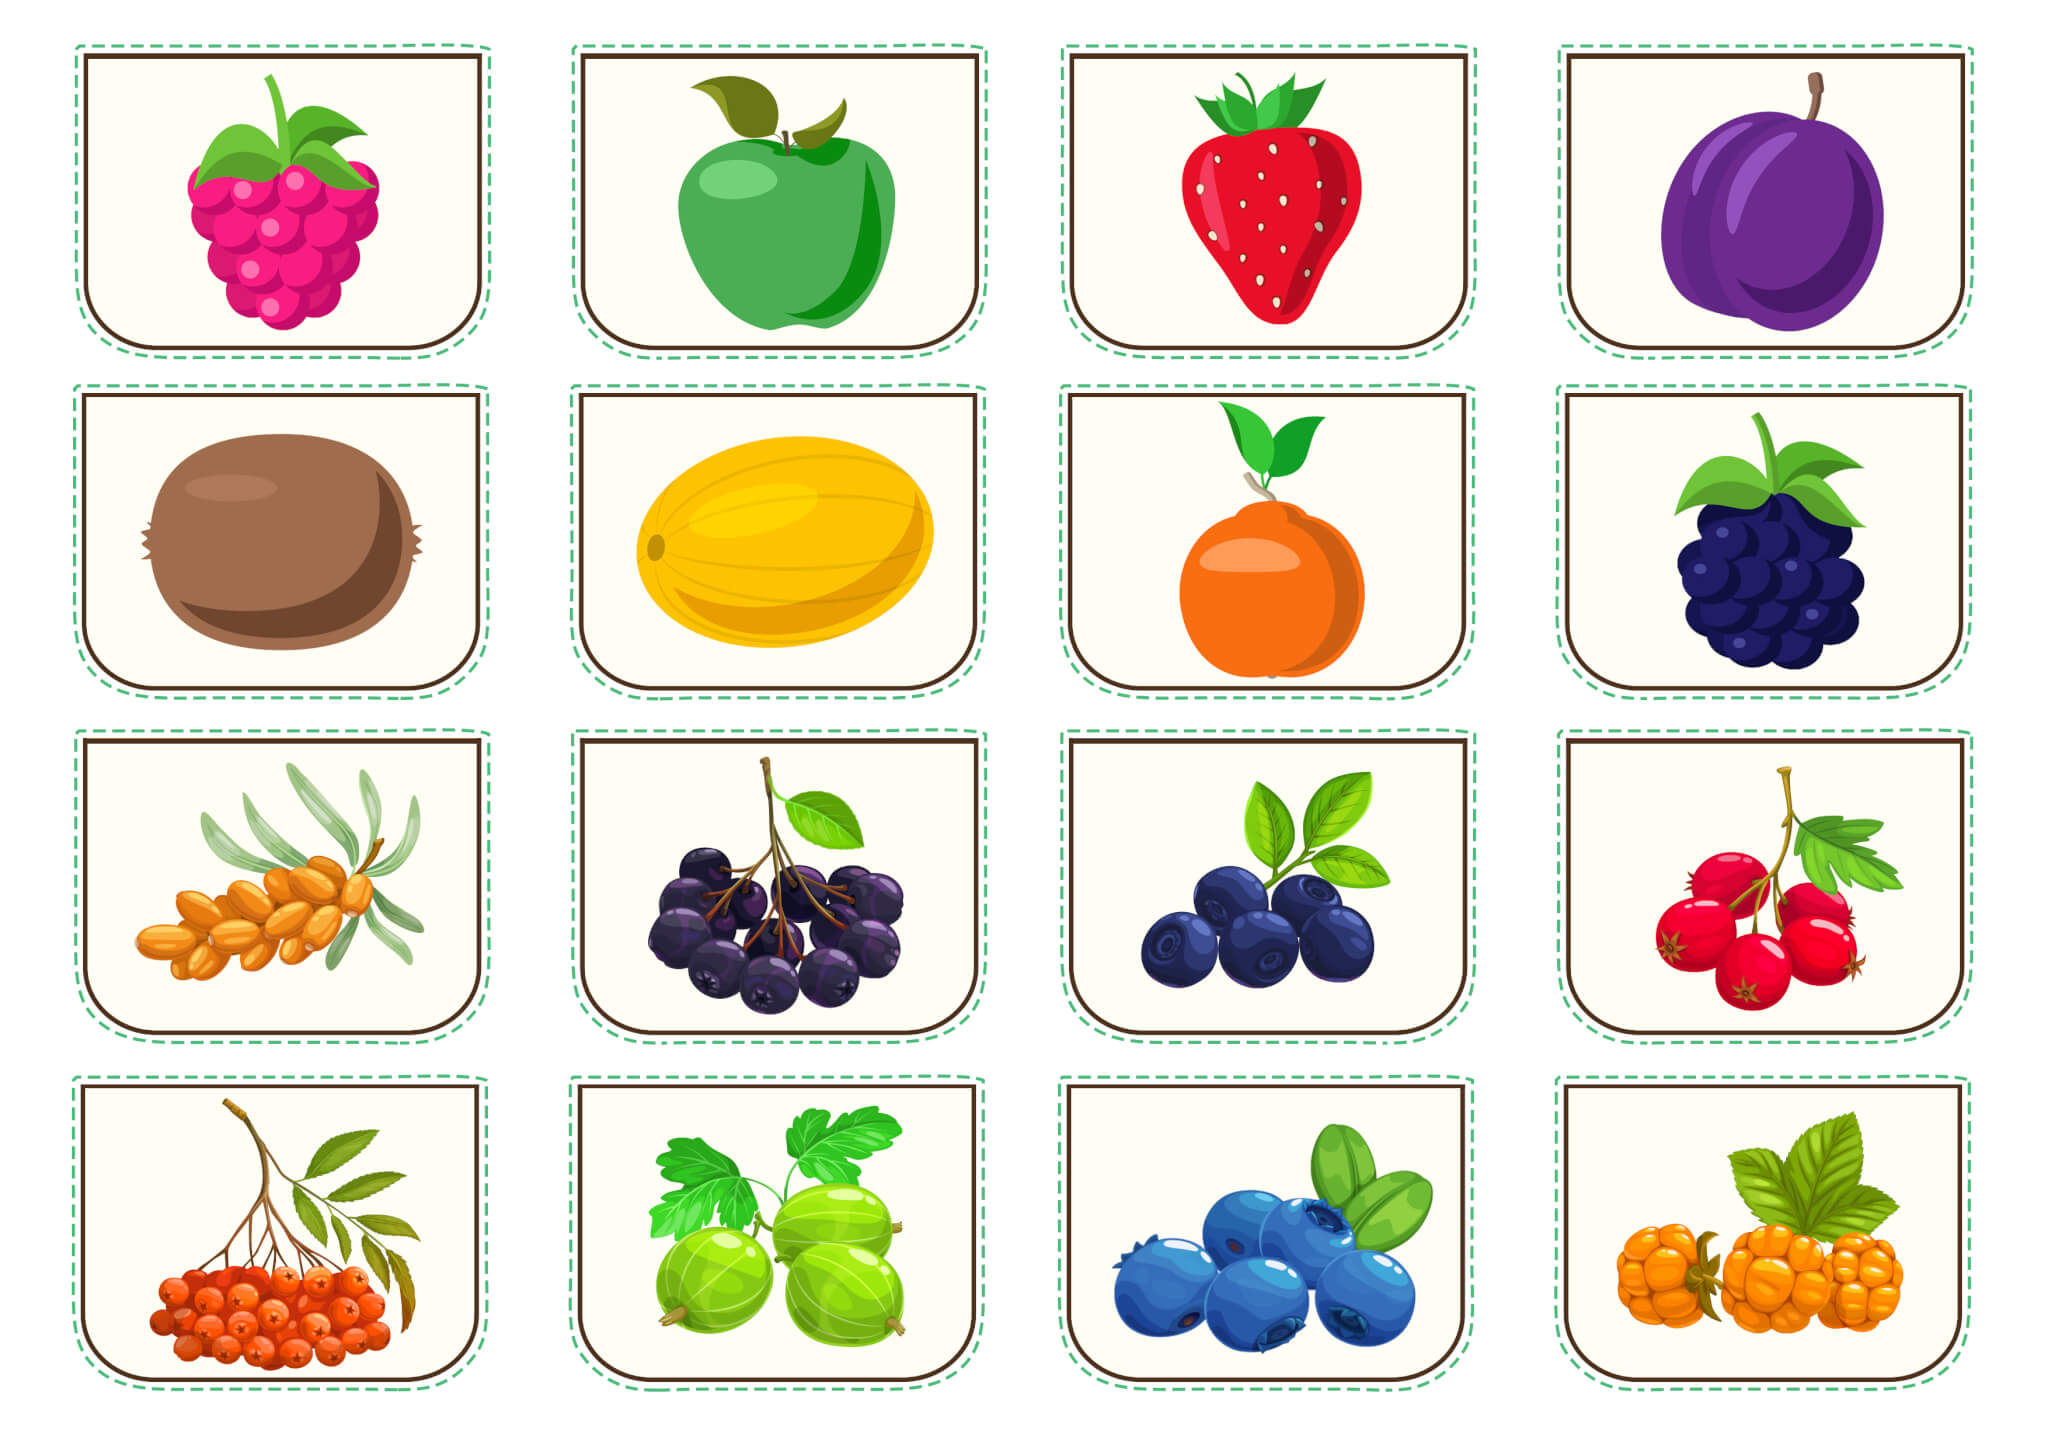 Activity sheet «The colors of fruits and berries»